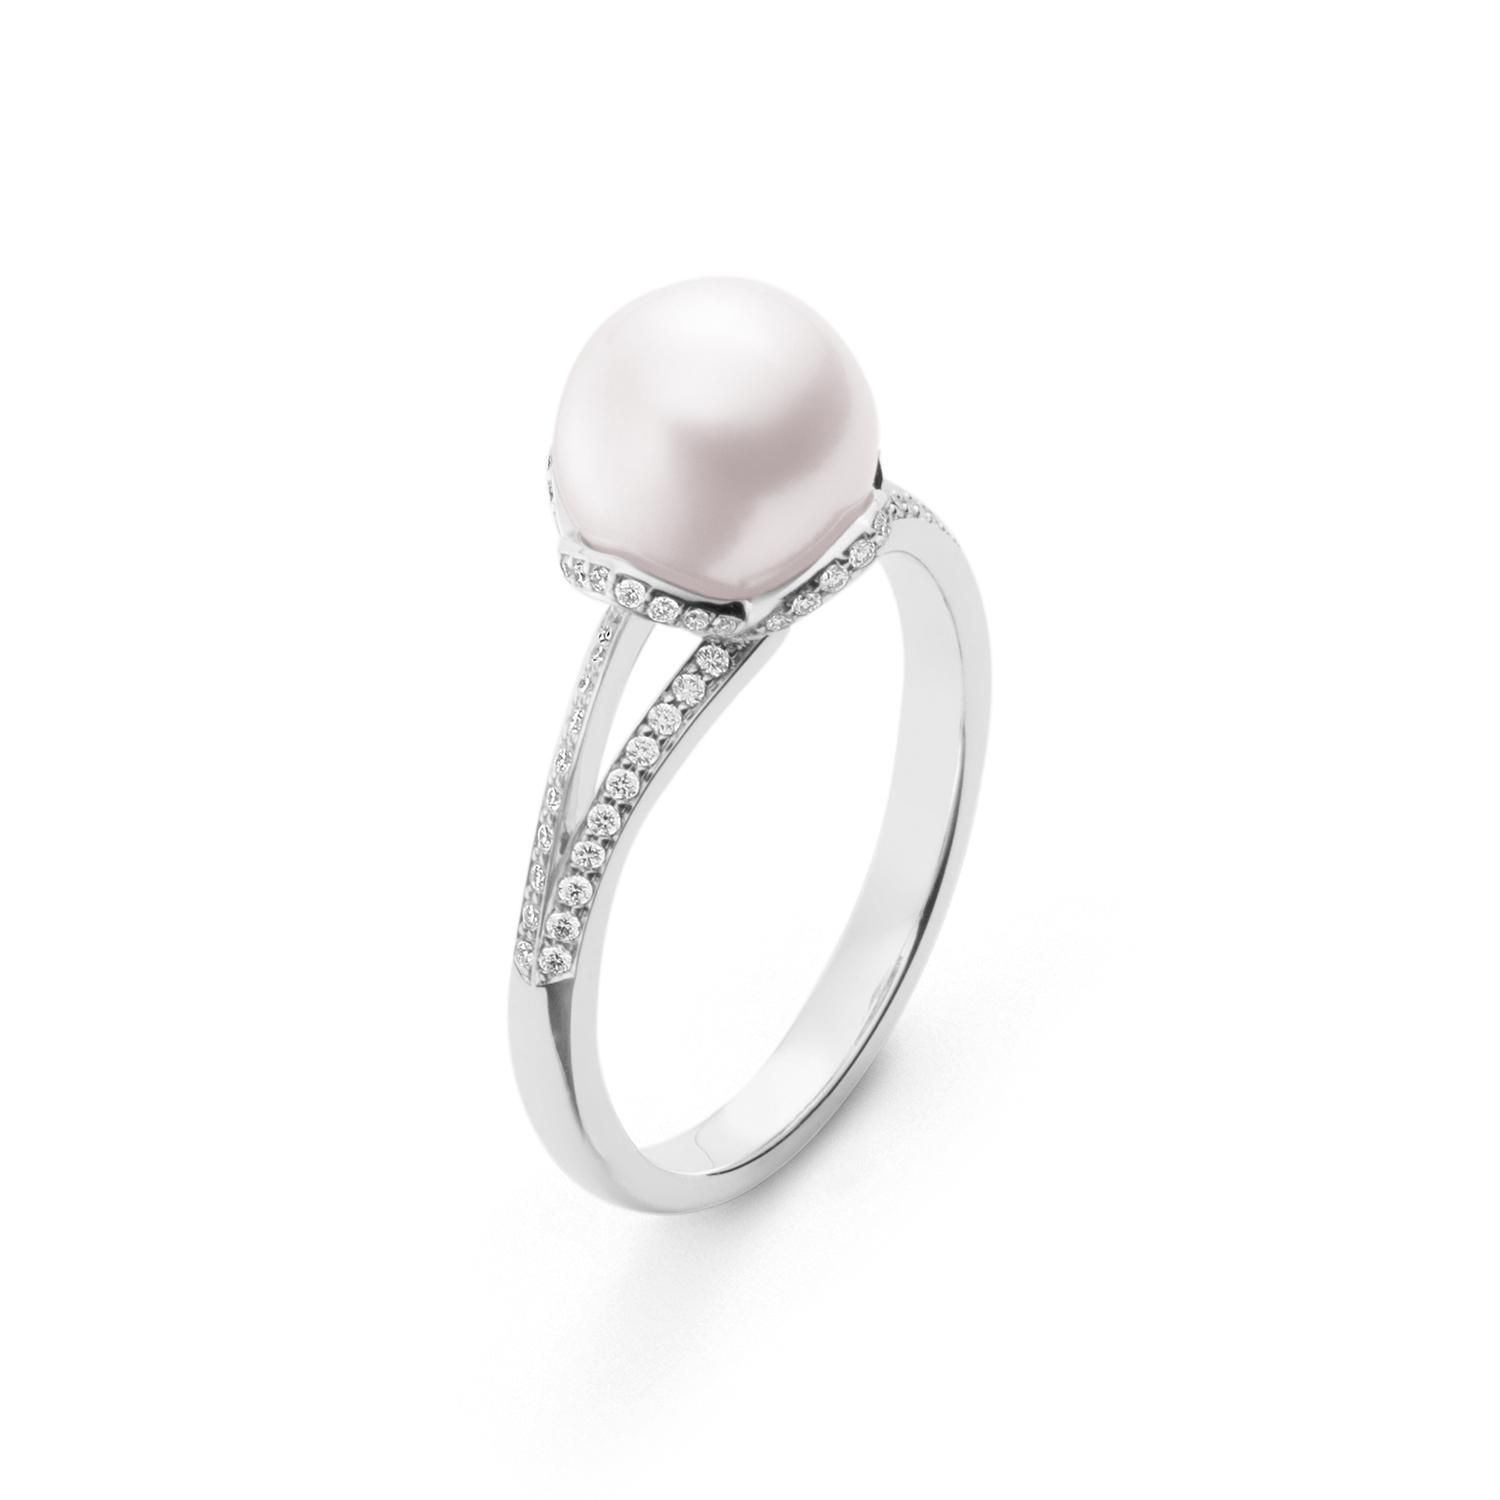 Mikimoto Embrace 8.5-8mm "A+" Akoya Cultured Pearl and Diamond Ring